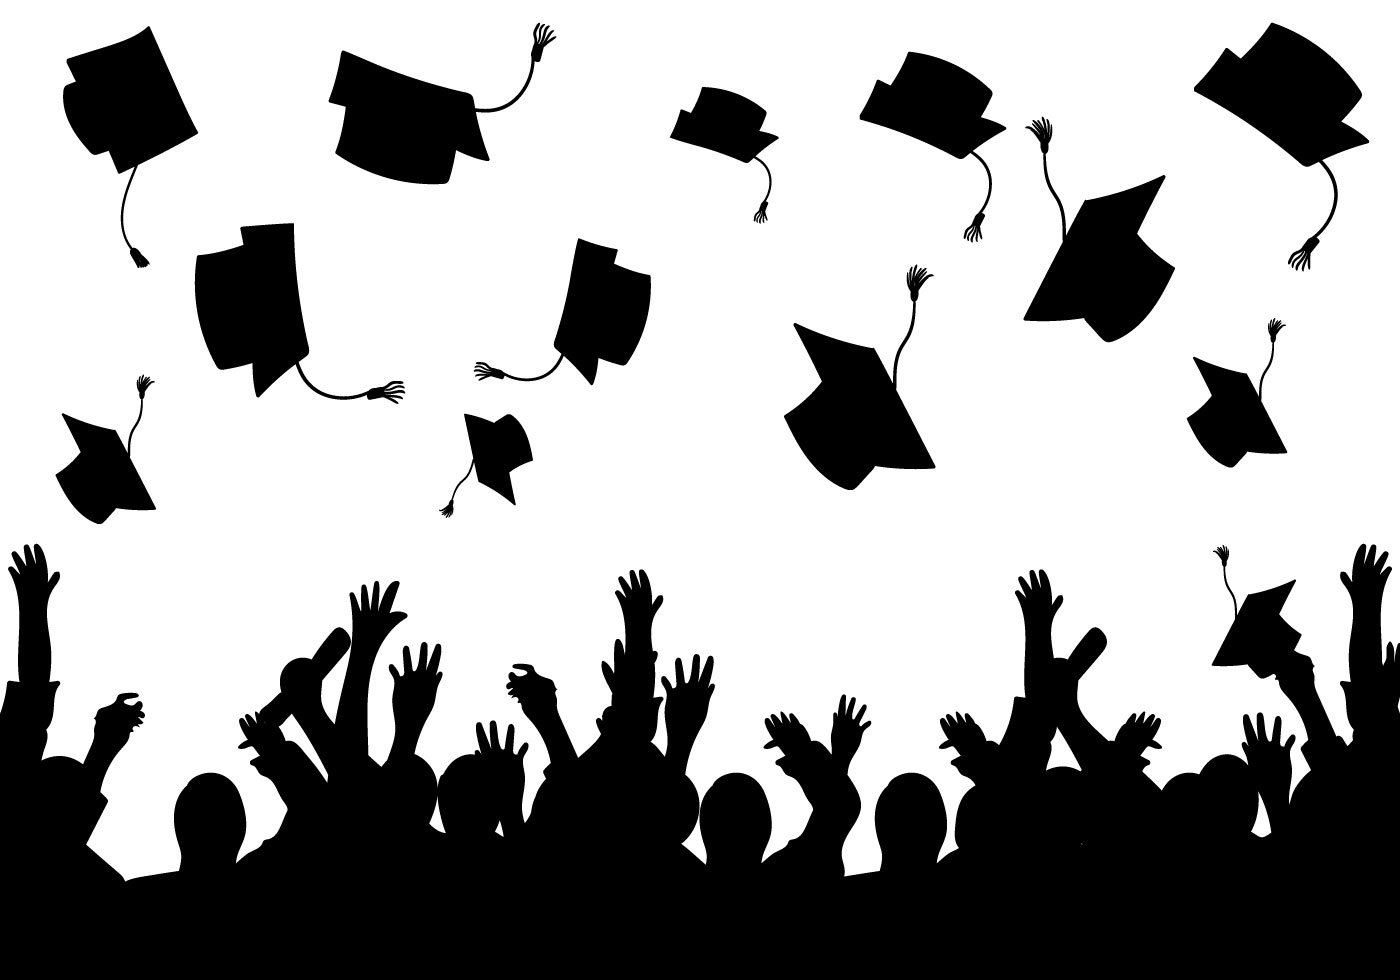 Graduation Vector Silhouette Free Art Presentation PPT Backgrounds for Powe...